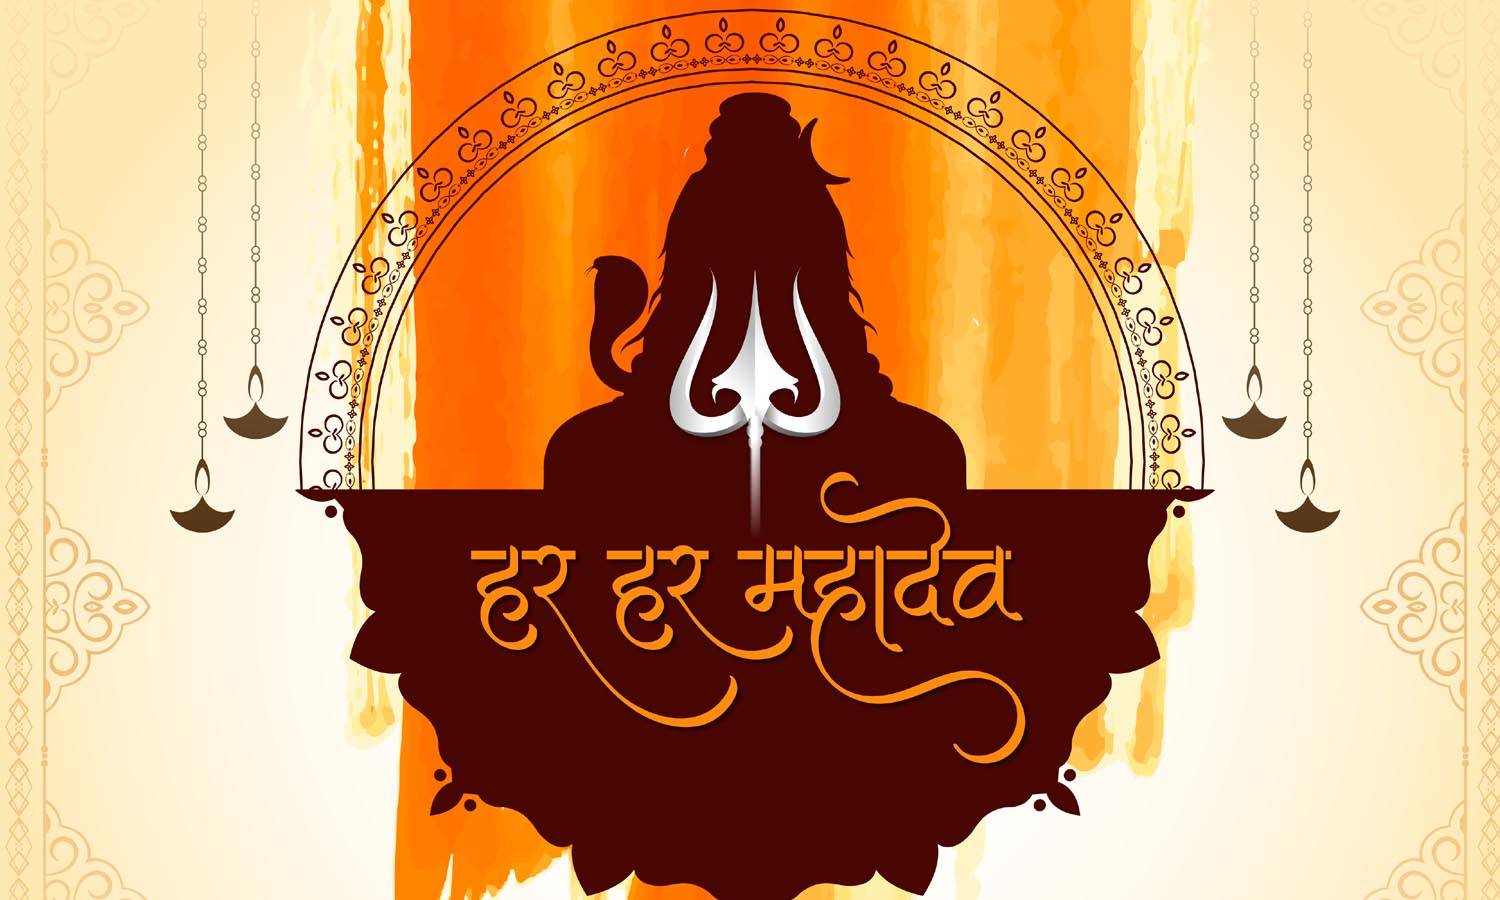 Lord Shiva Quotes Sayings, Mahadev, bholenath Blessing Messages Images